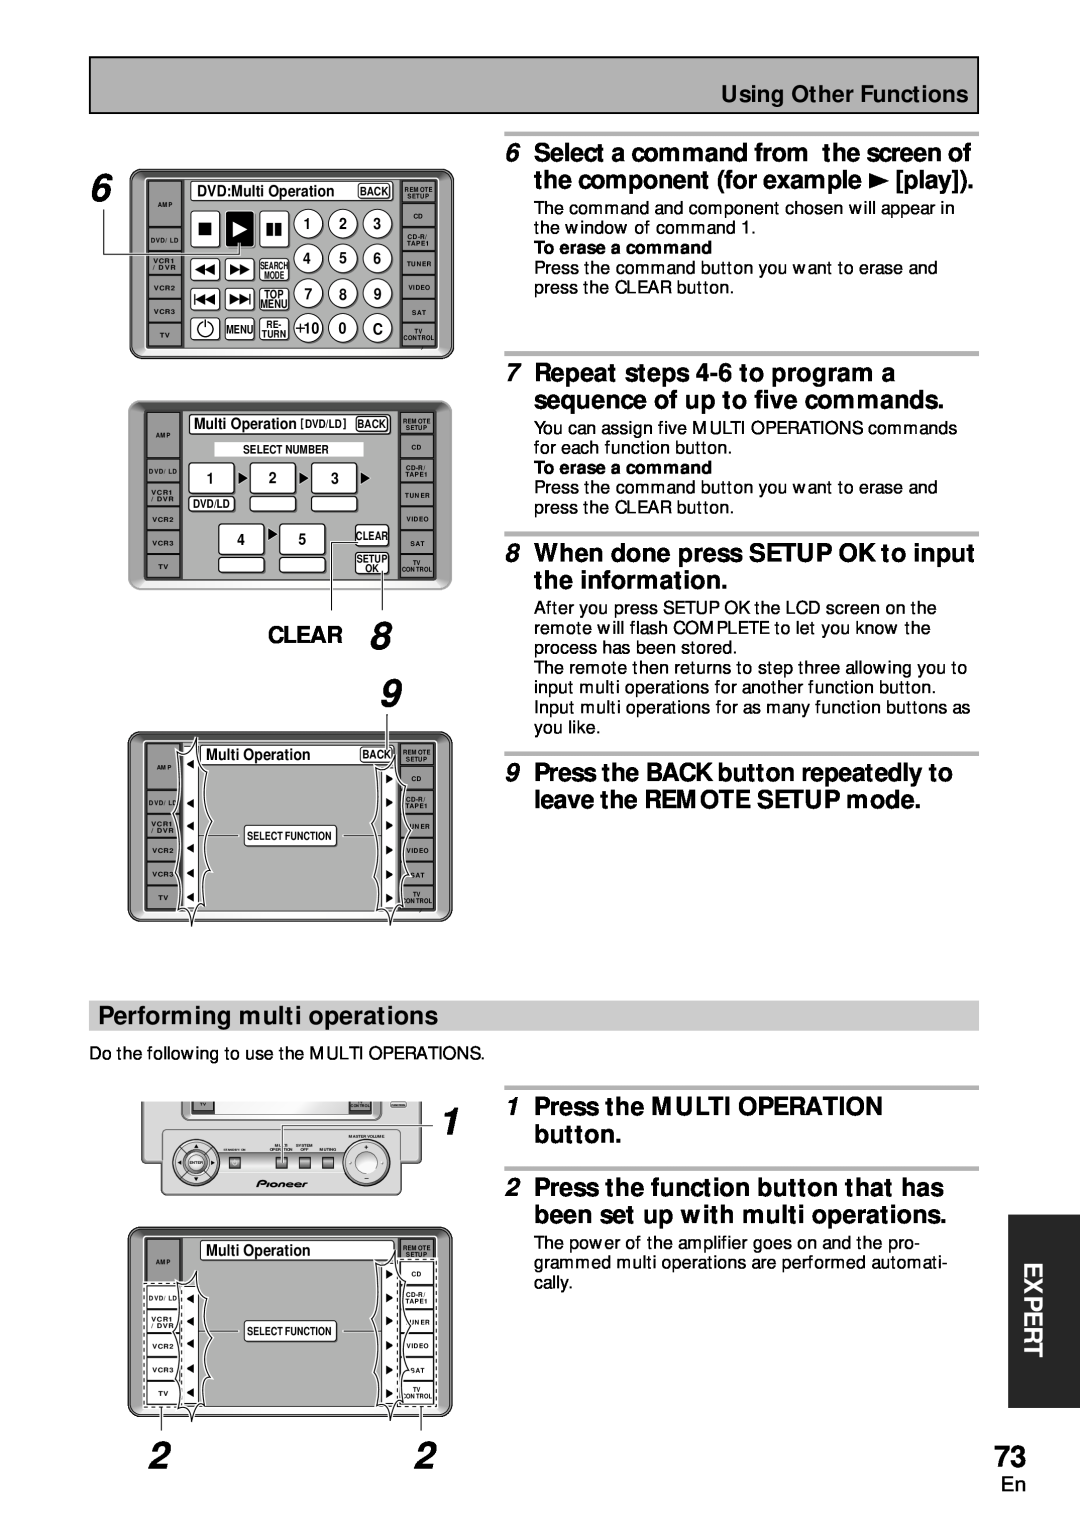 Pioneer VSA-AX10 6Select a command from the screen of, the component for example 3 play, 7Repeat steps 4-6to program a 